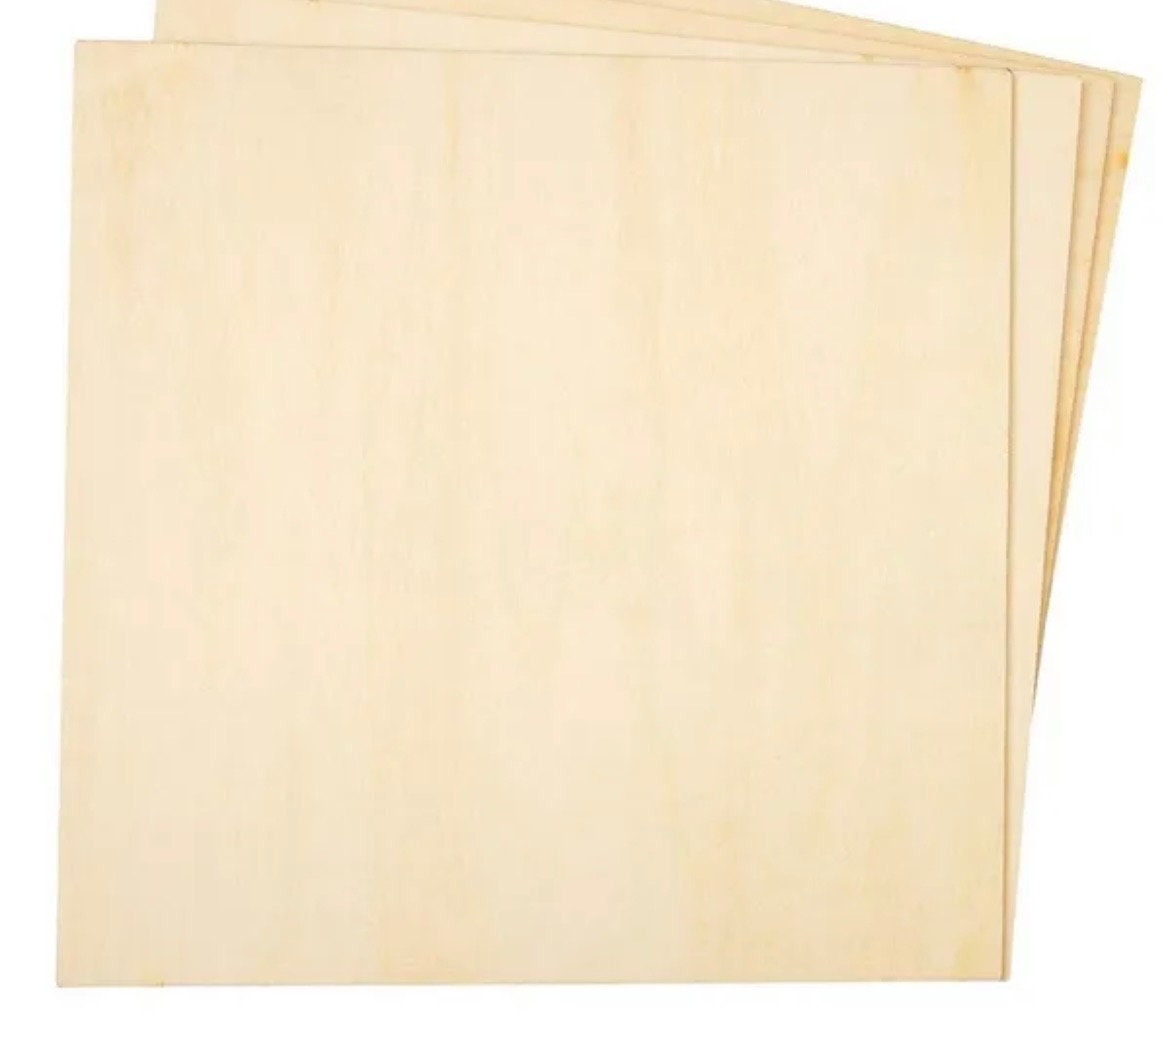 Woodcraft Pattern Carbon Transfer Tracing Paper 2 Extra Large Sheets 42  Inches by 26 Inch Sheets for Wood or Metal 